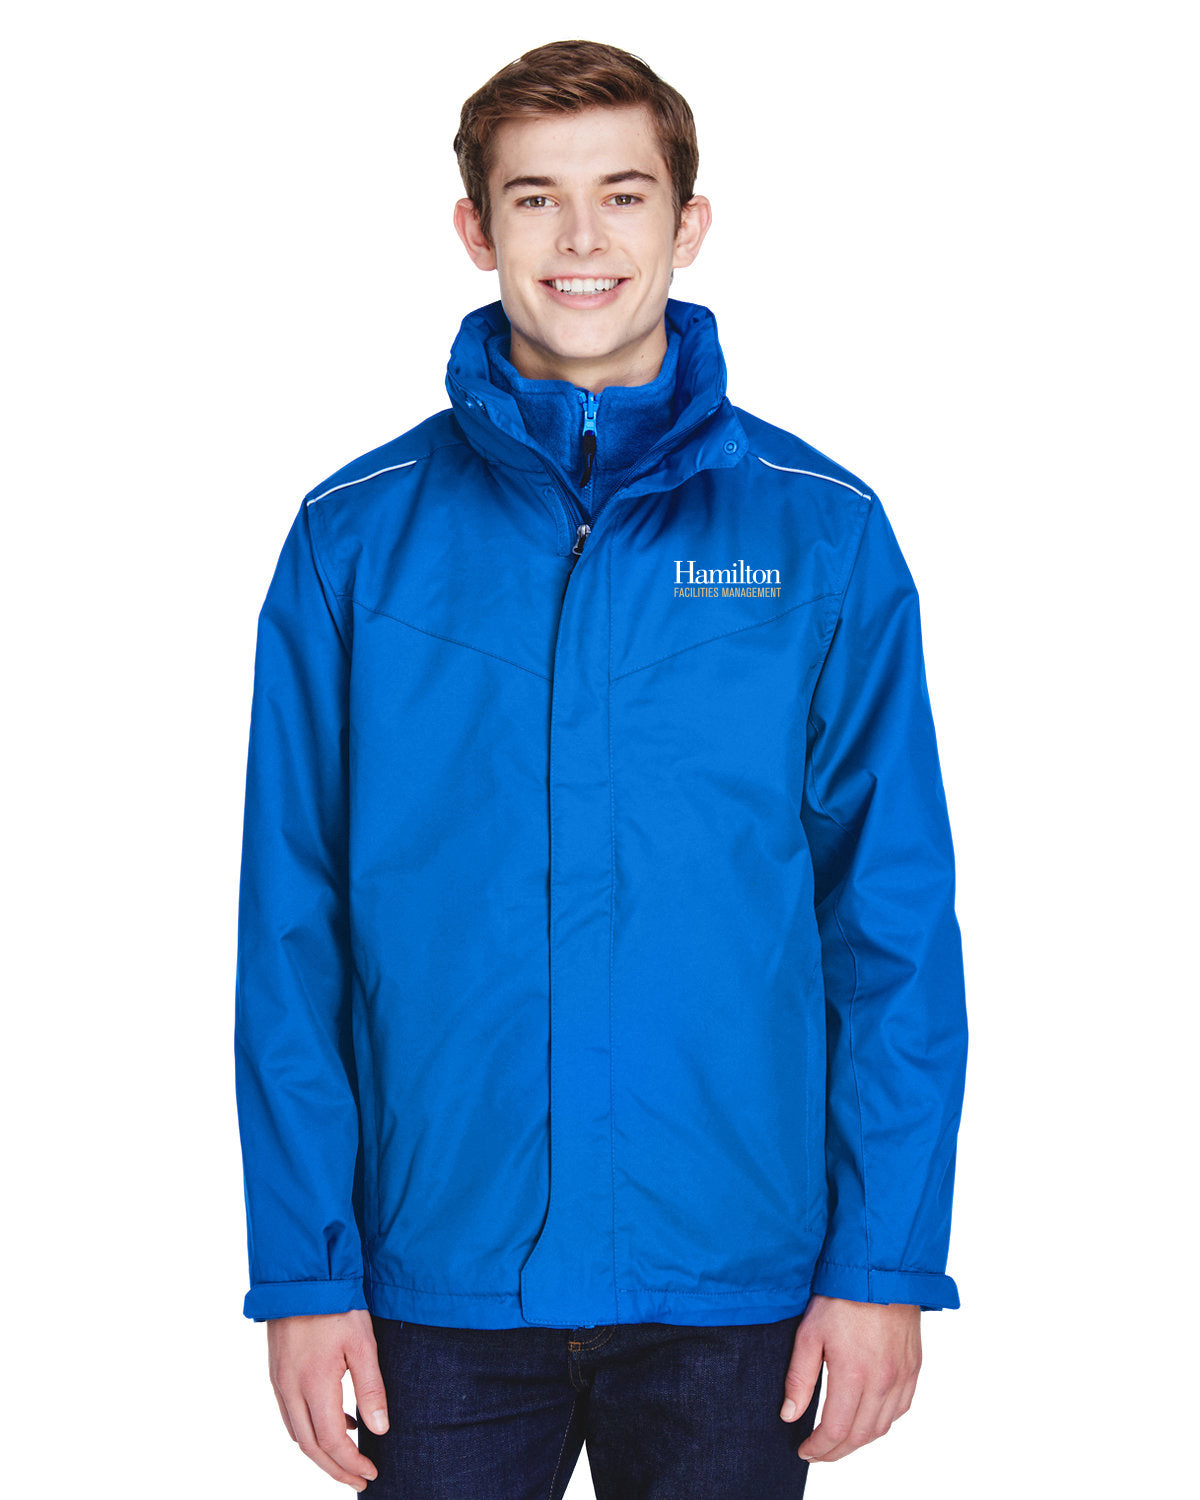 Adult 3-in-1 Jacket with Fleece Liner - Royal